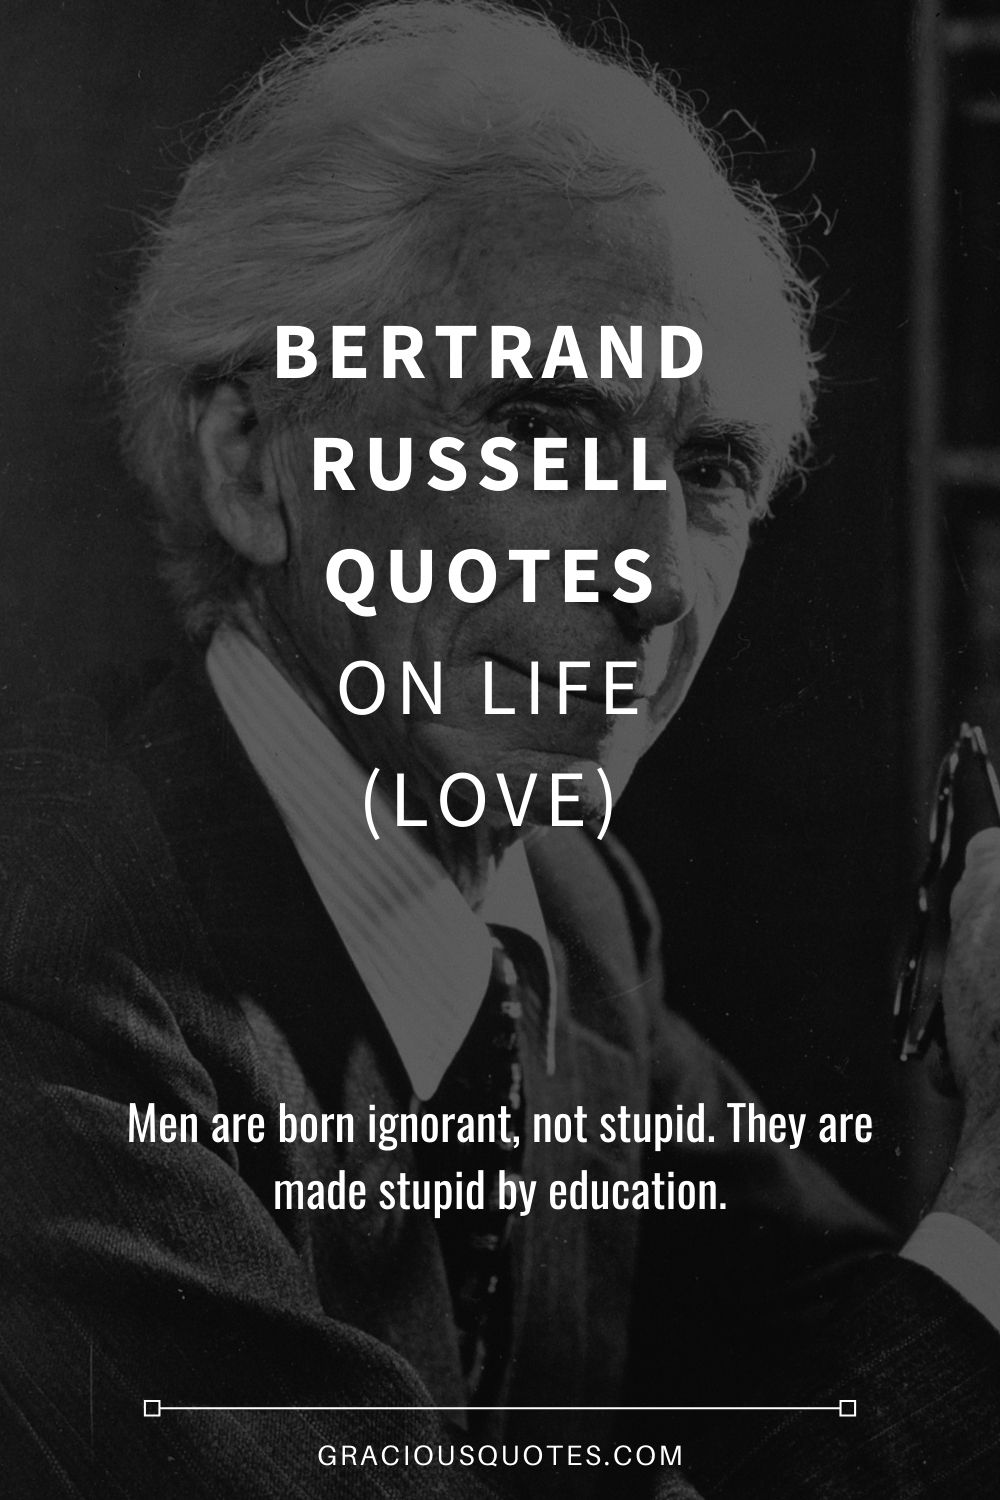 Bertrand Russell Quotes on Life (LOVE) - Gracious Quotes